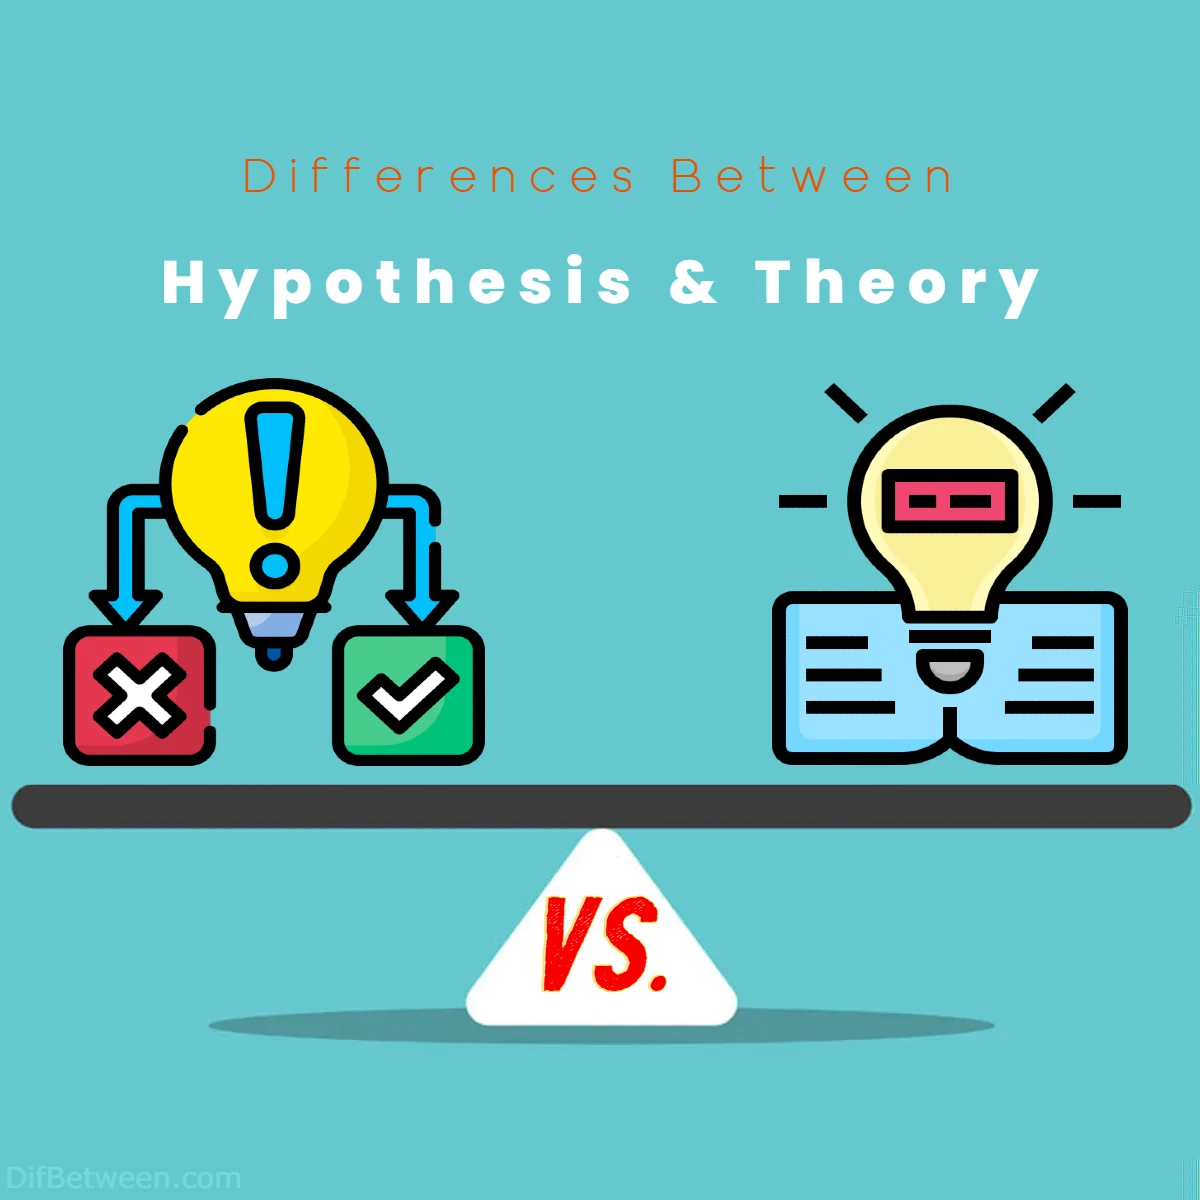 Differences Between Hypothesis vs Theory